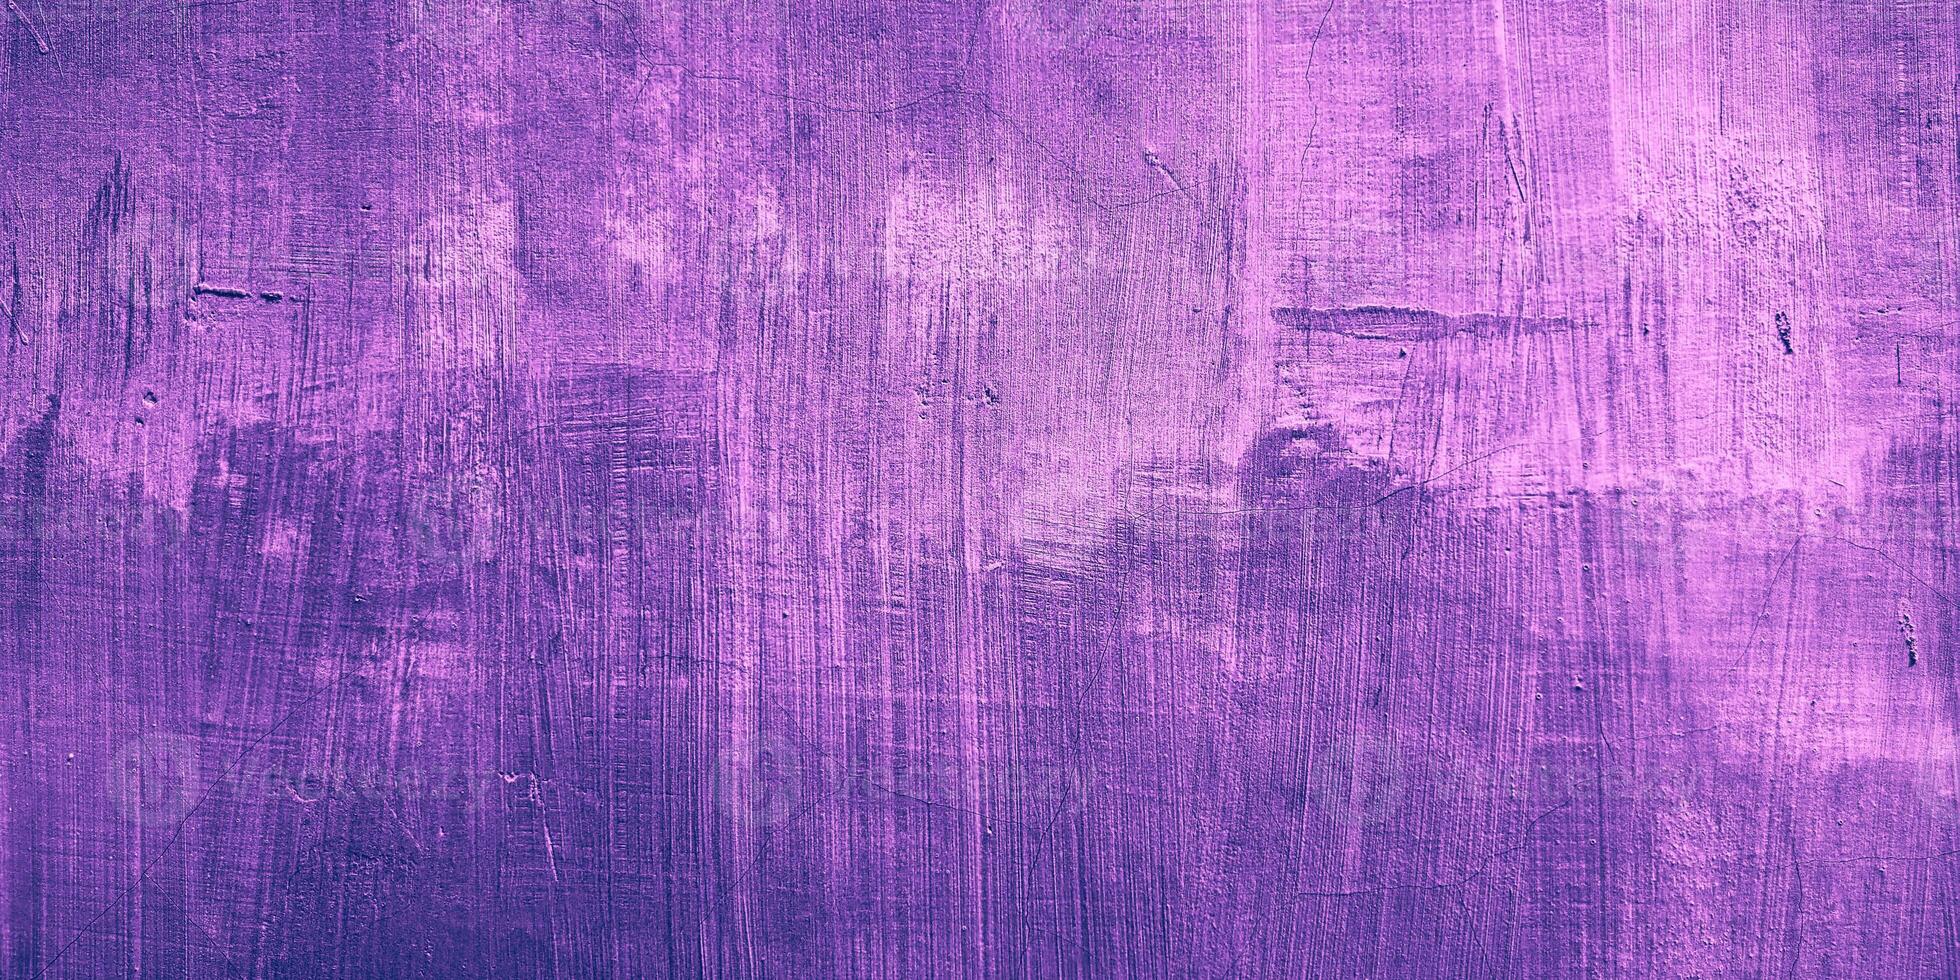 Texture abstract purple wall background photo